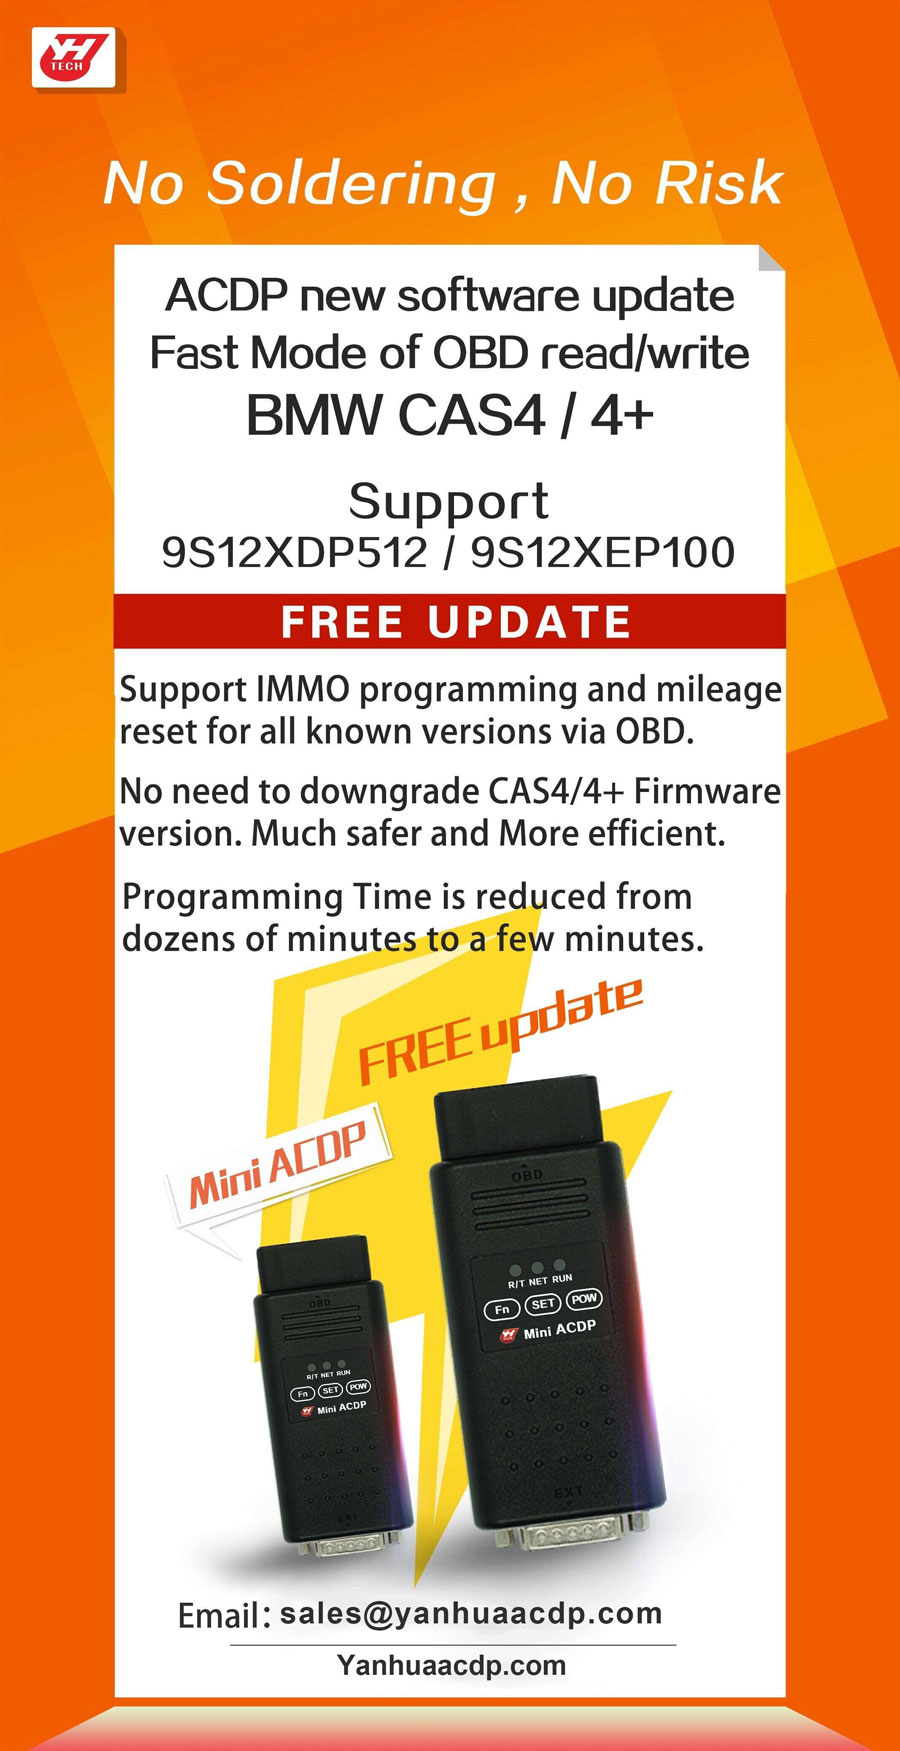 yanhua-acdp-cas4-obd-function-free-update